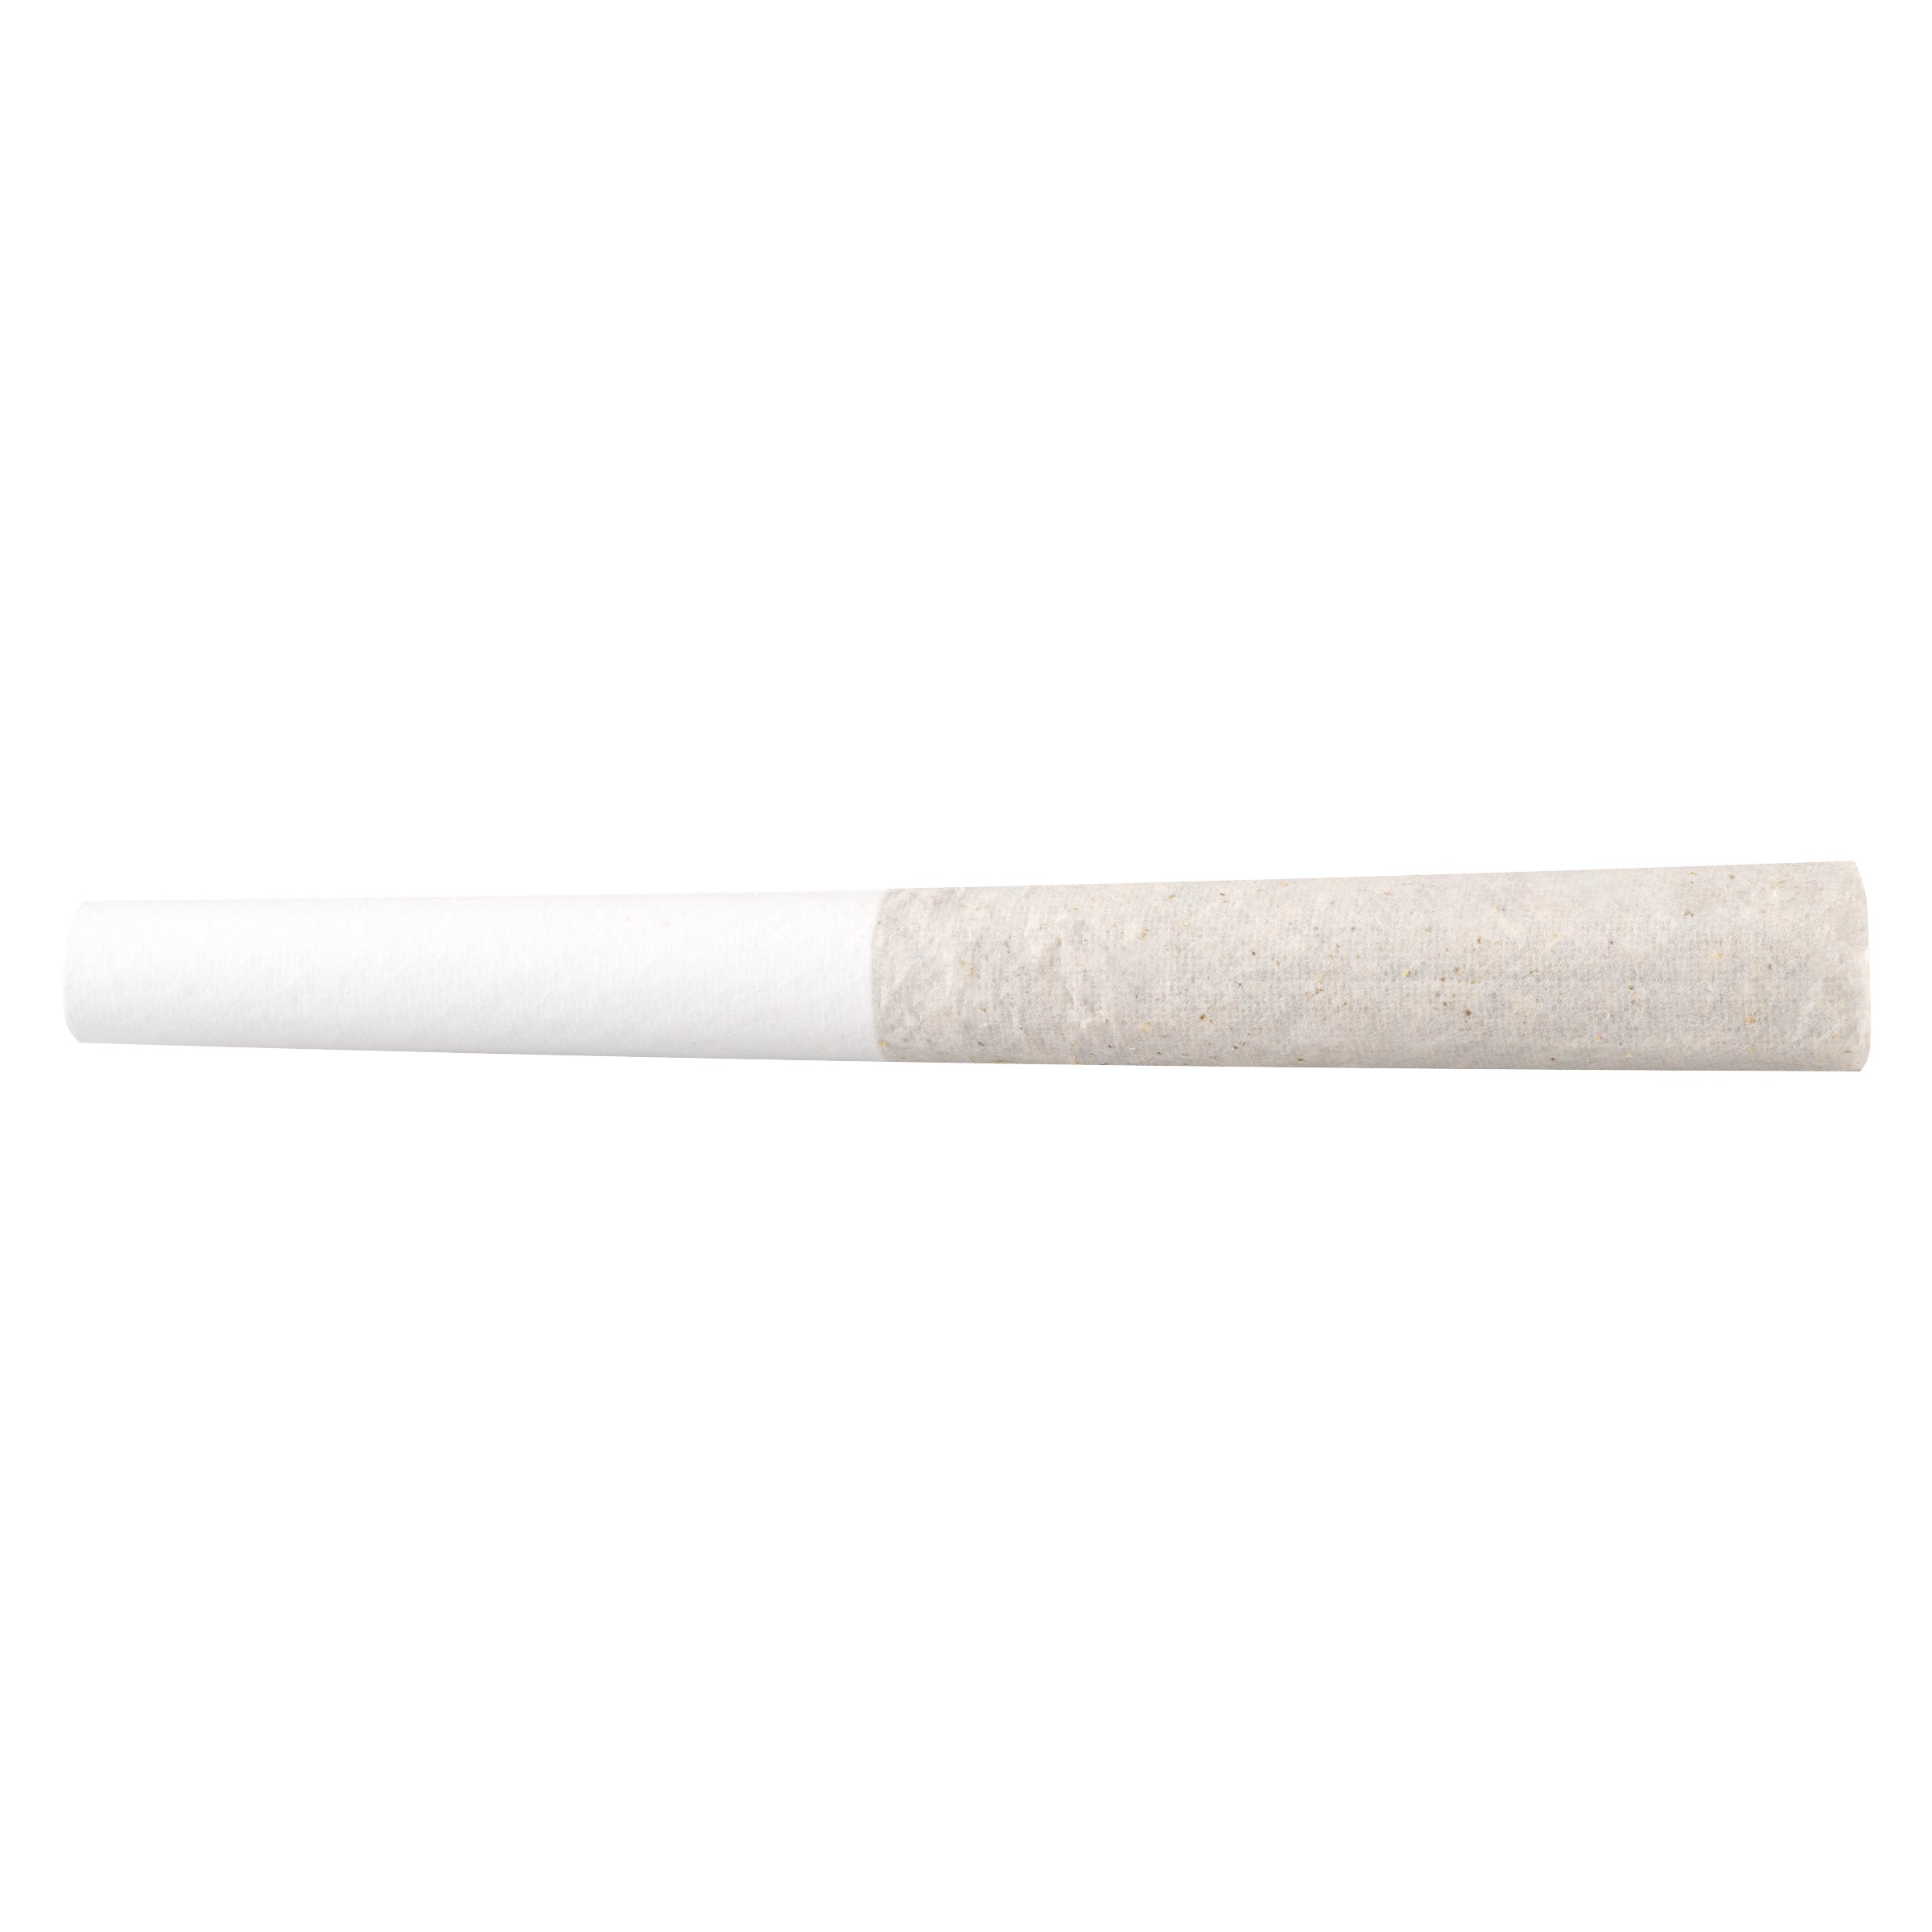 GOOD SUPPLY JUICED WILD BERRY (IND) INF PRE-ROLL 0.5GX5